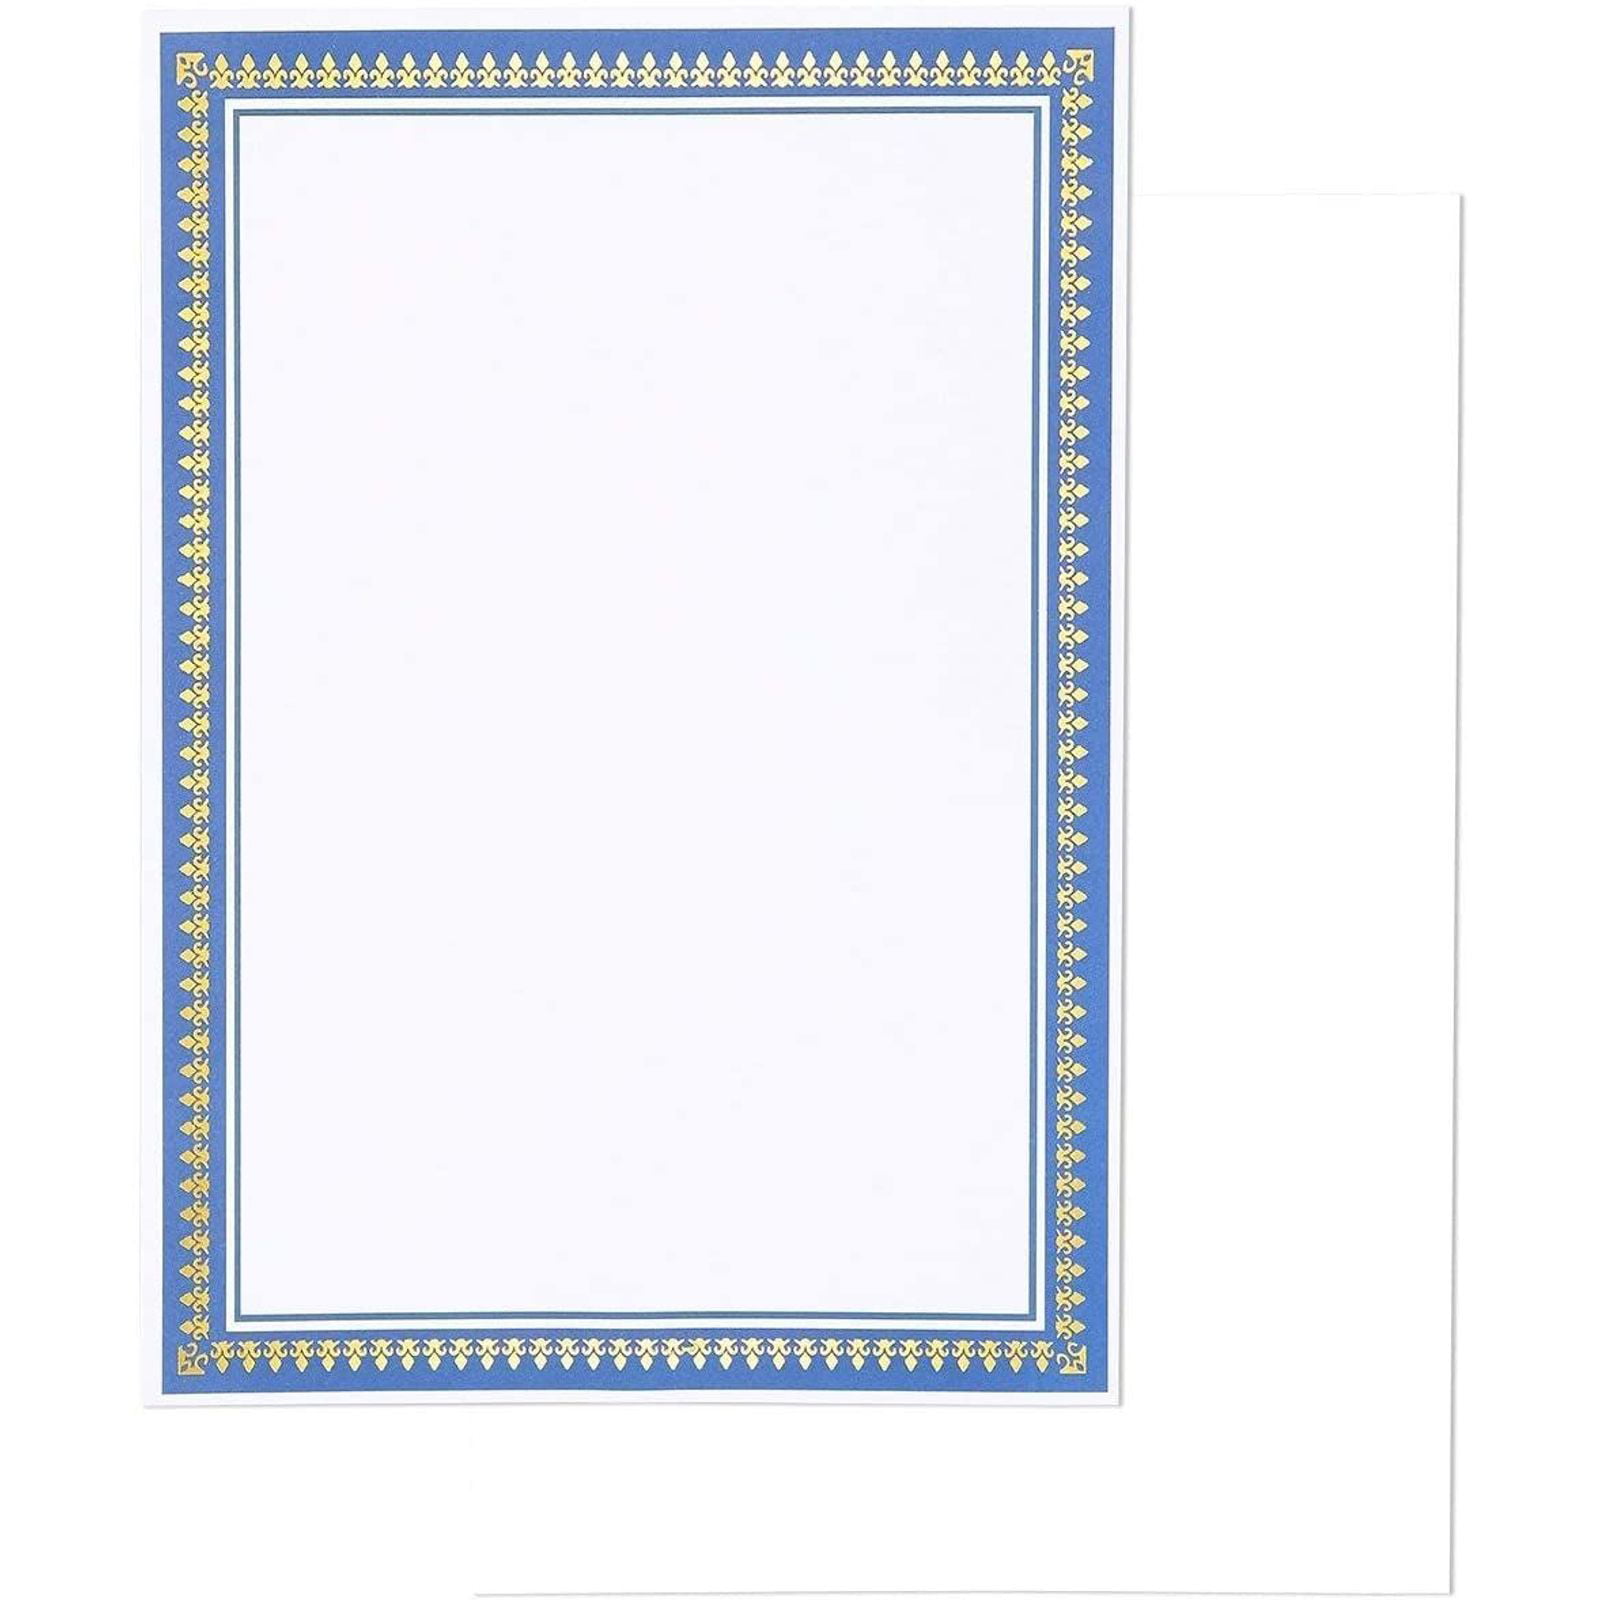 Certificate Paper with Gold and Blue Border Award Certificates 